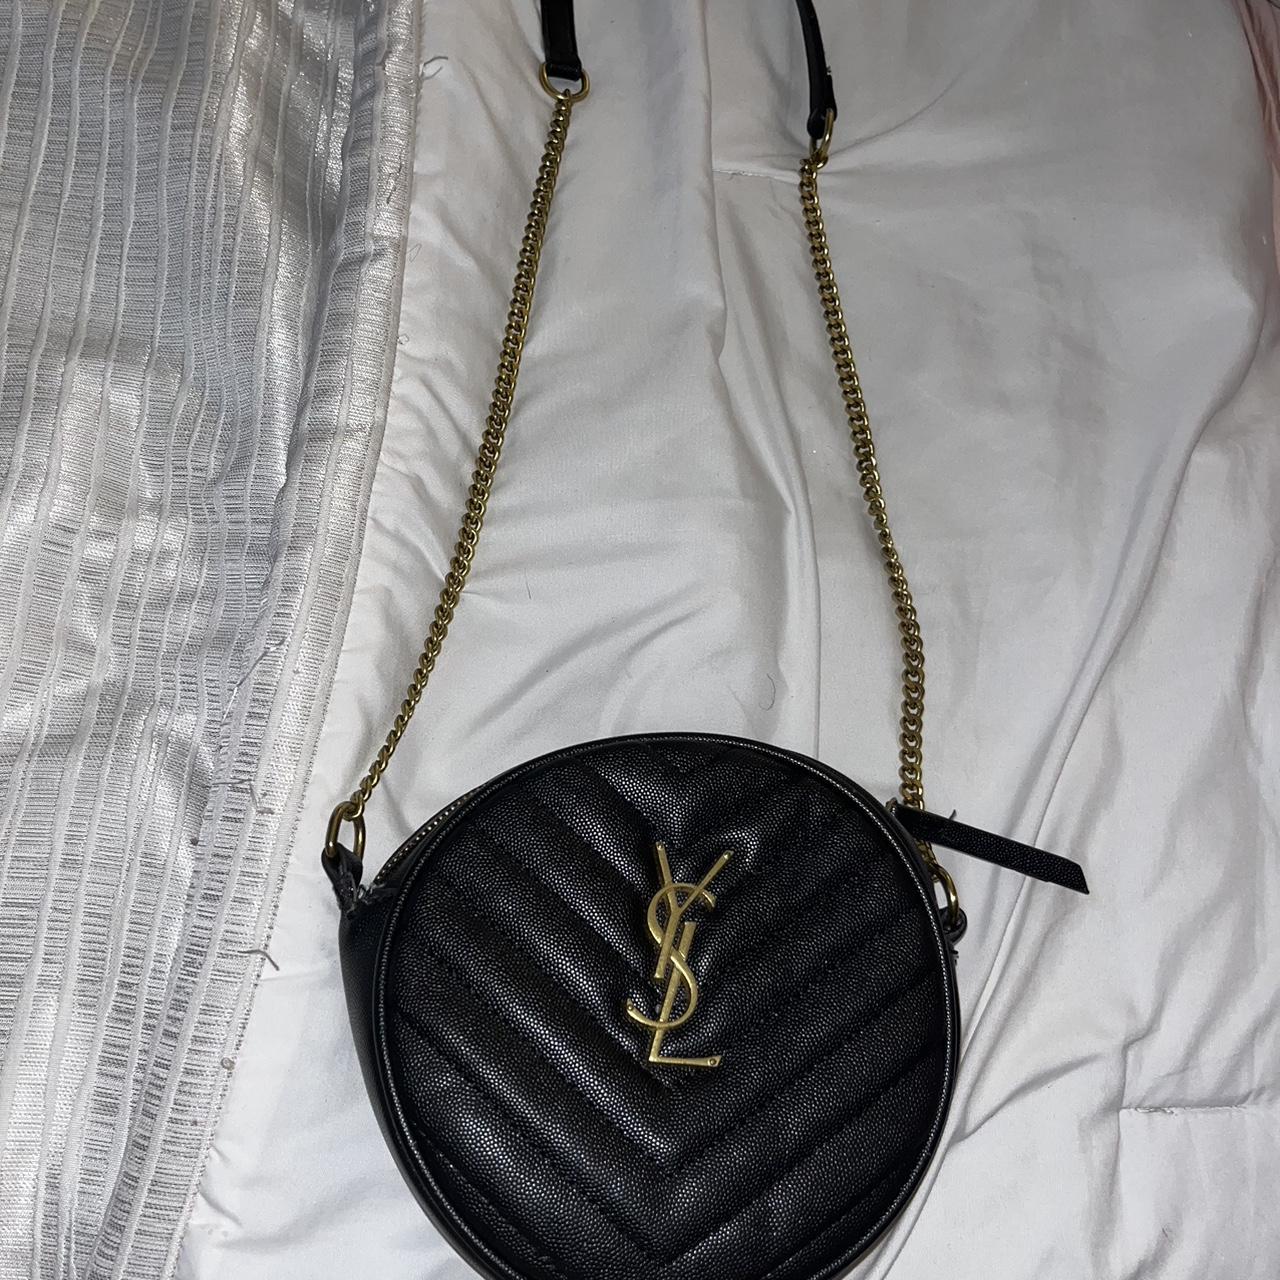 Dispute over Yves St. Laurent purse settled by B.C. tribunal